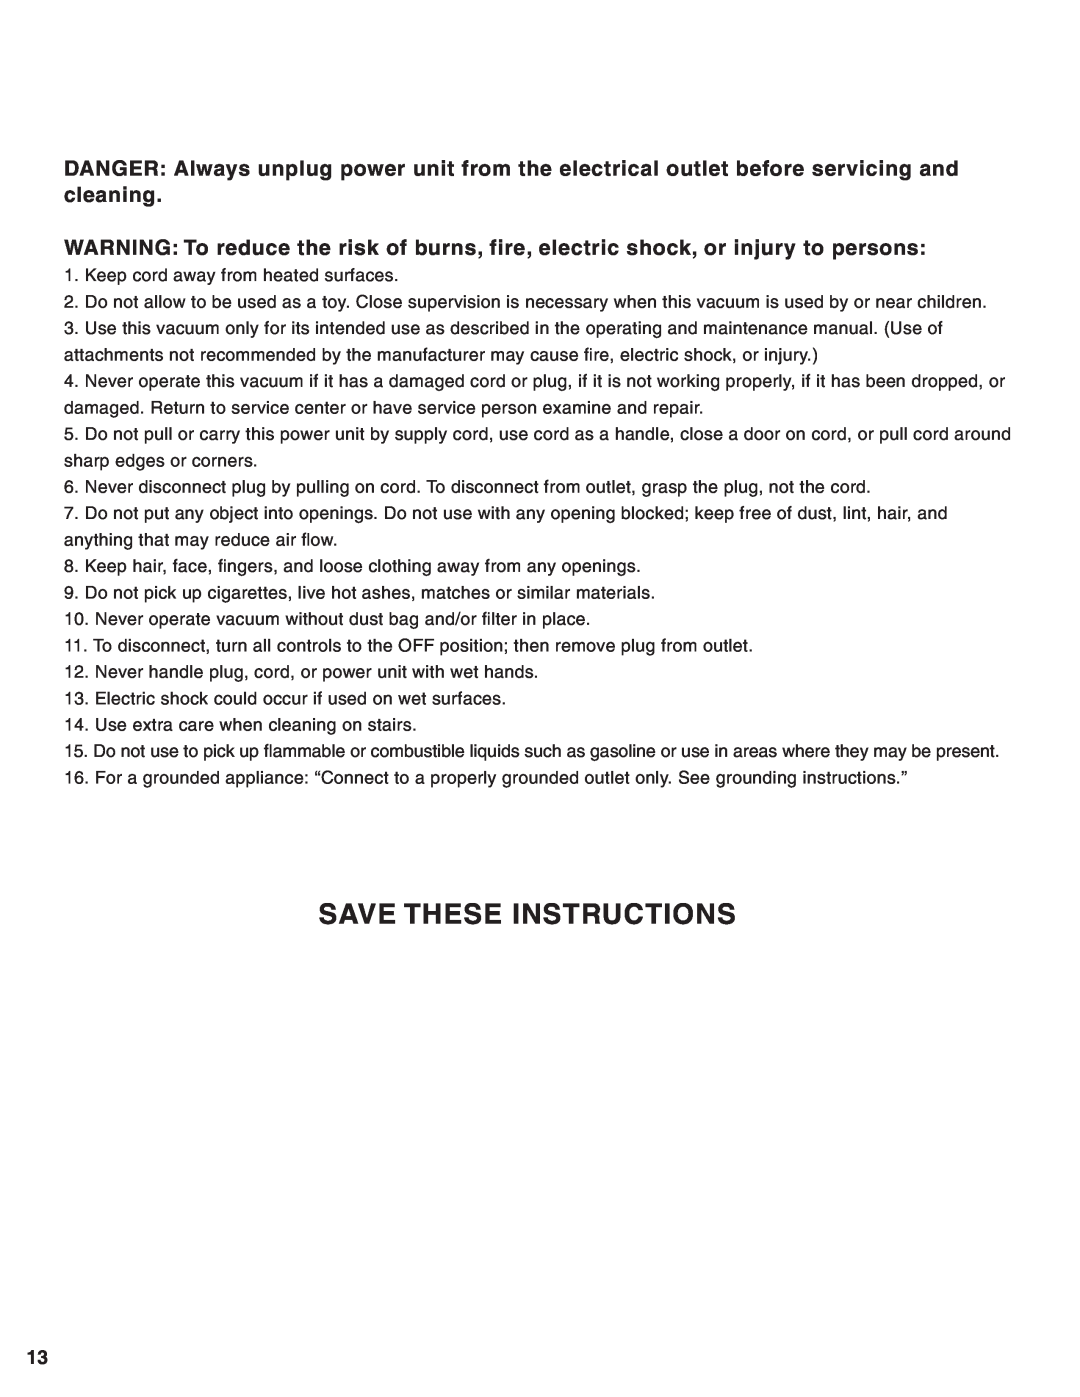 Eureka Central Vacuum Cleaner manual Save These Instructions 